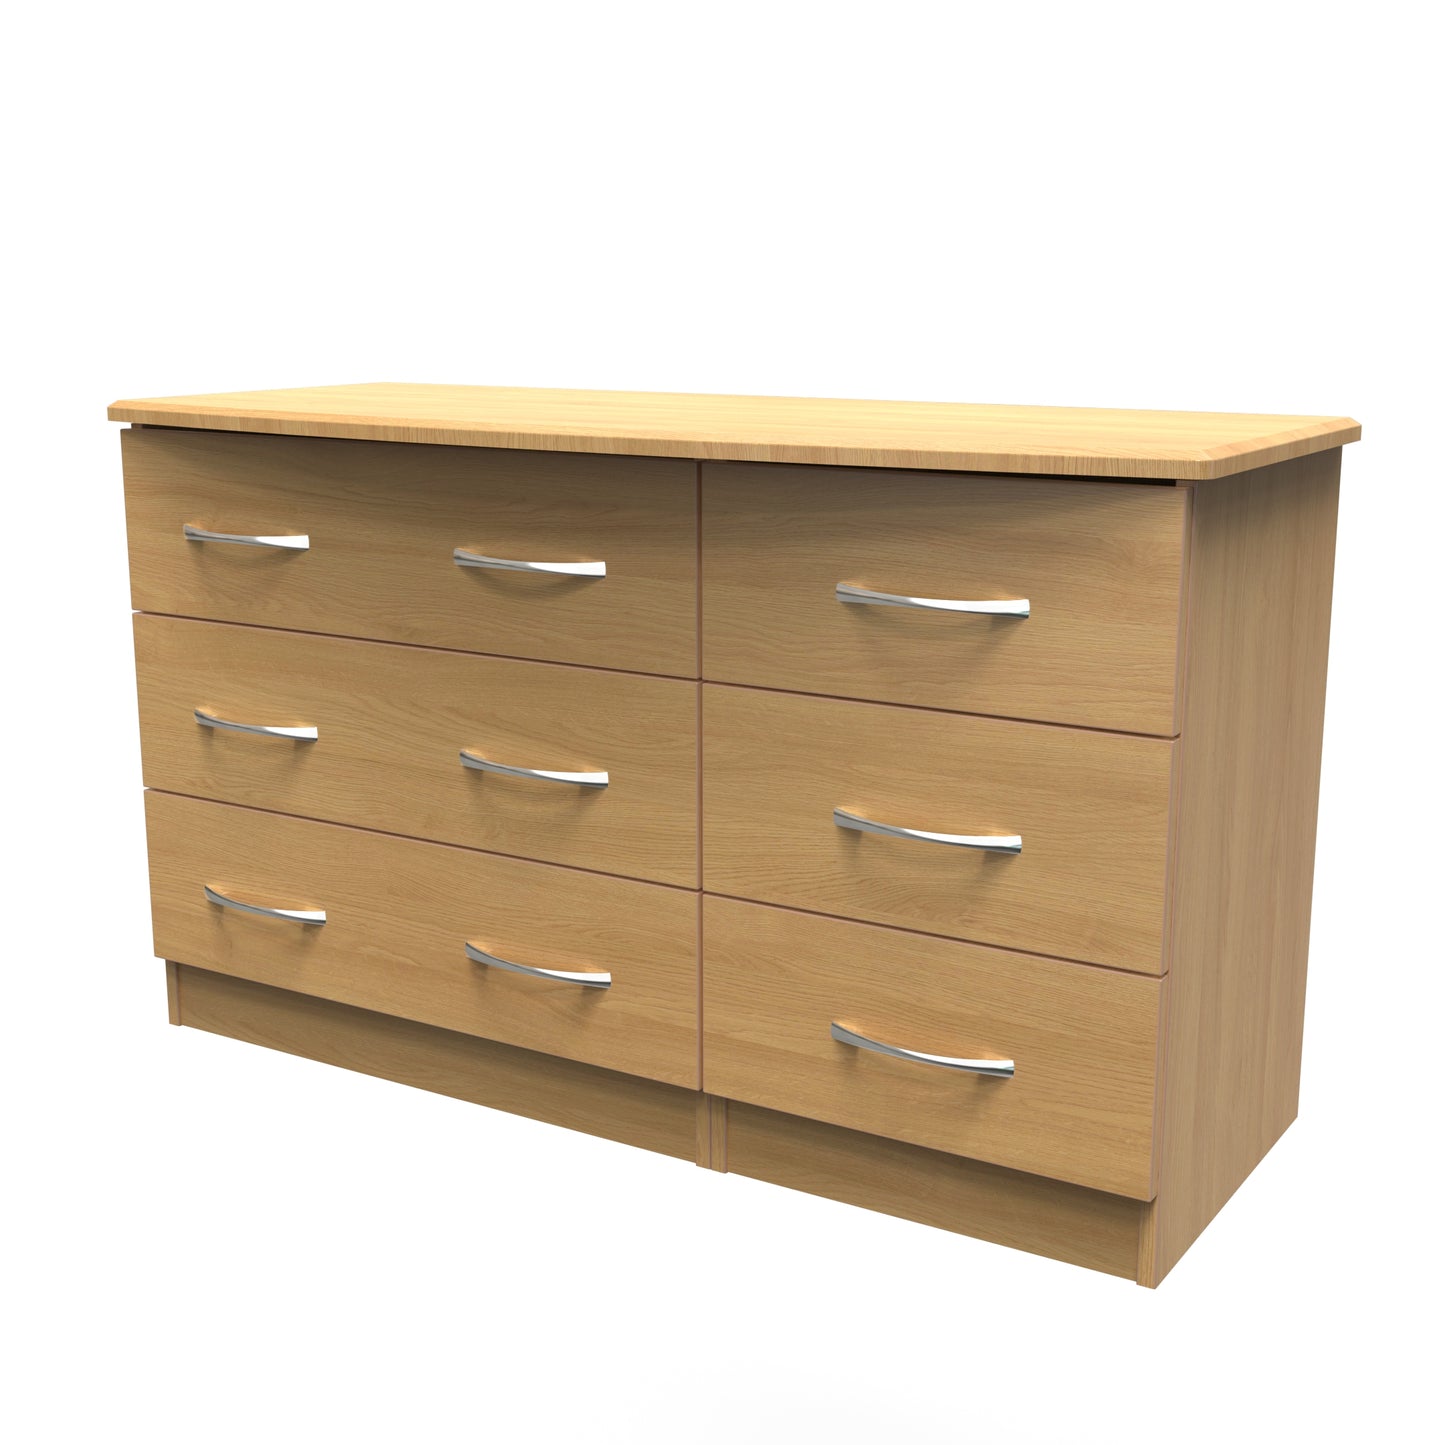 Eve 6 Drawer Wide Chest: Care Home Range